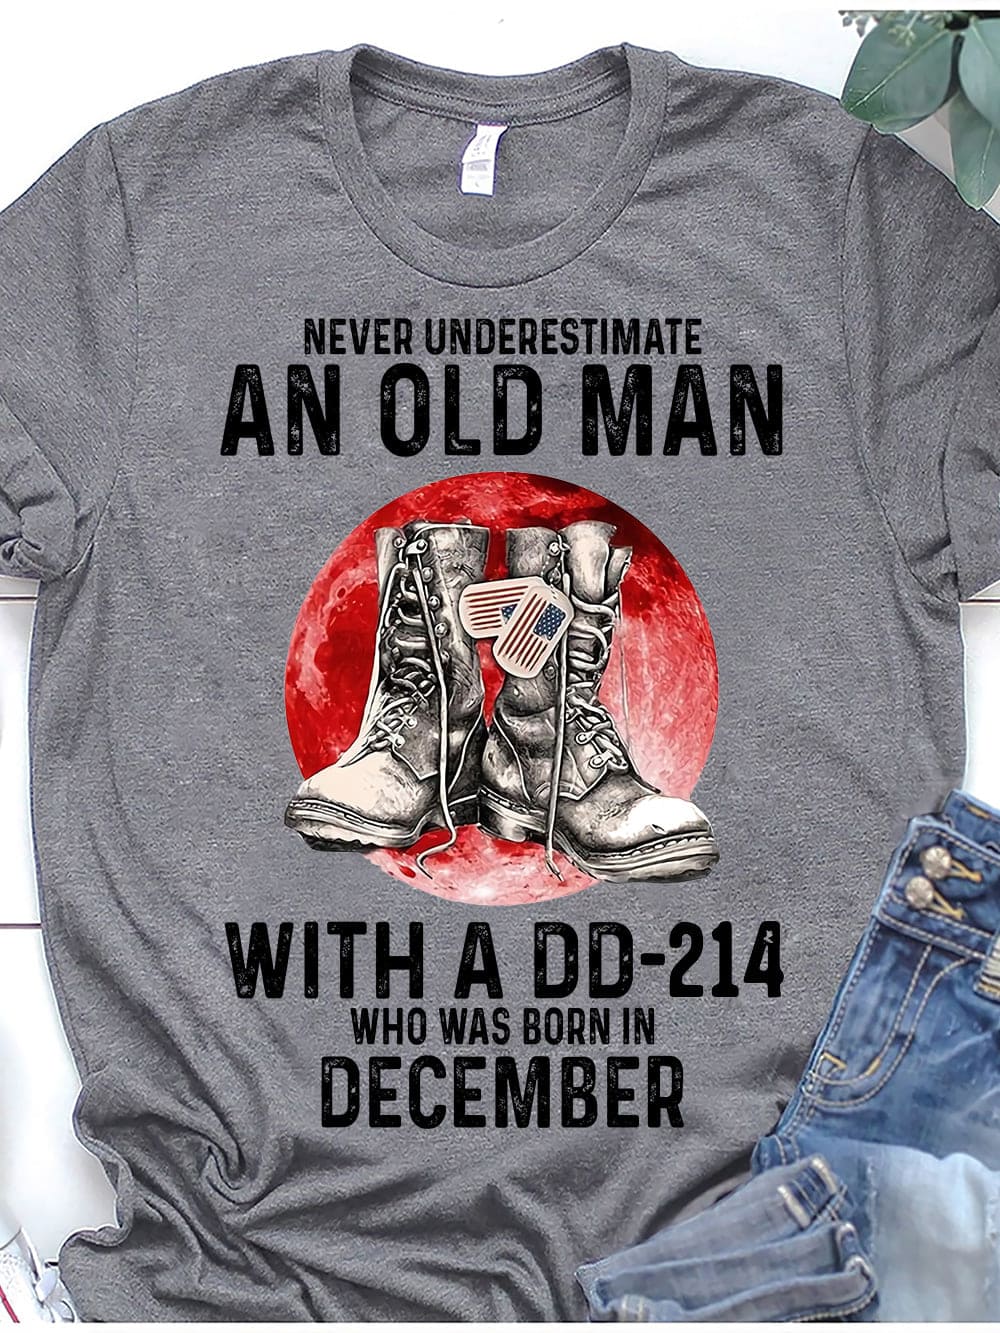 Never underestimate an old man with a DD-214 who was born in December - December veteran, amarican veterans T-shirt